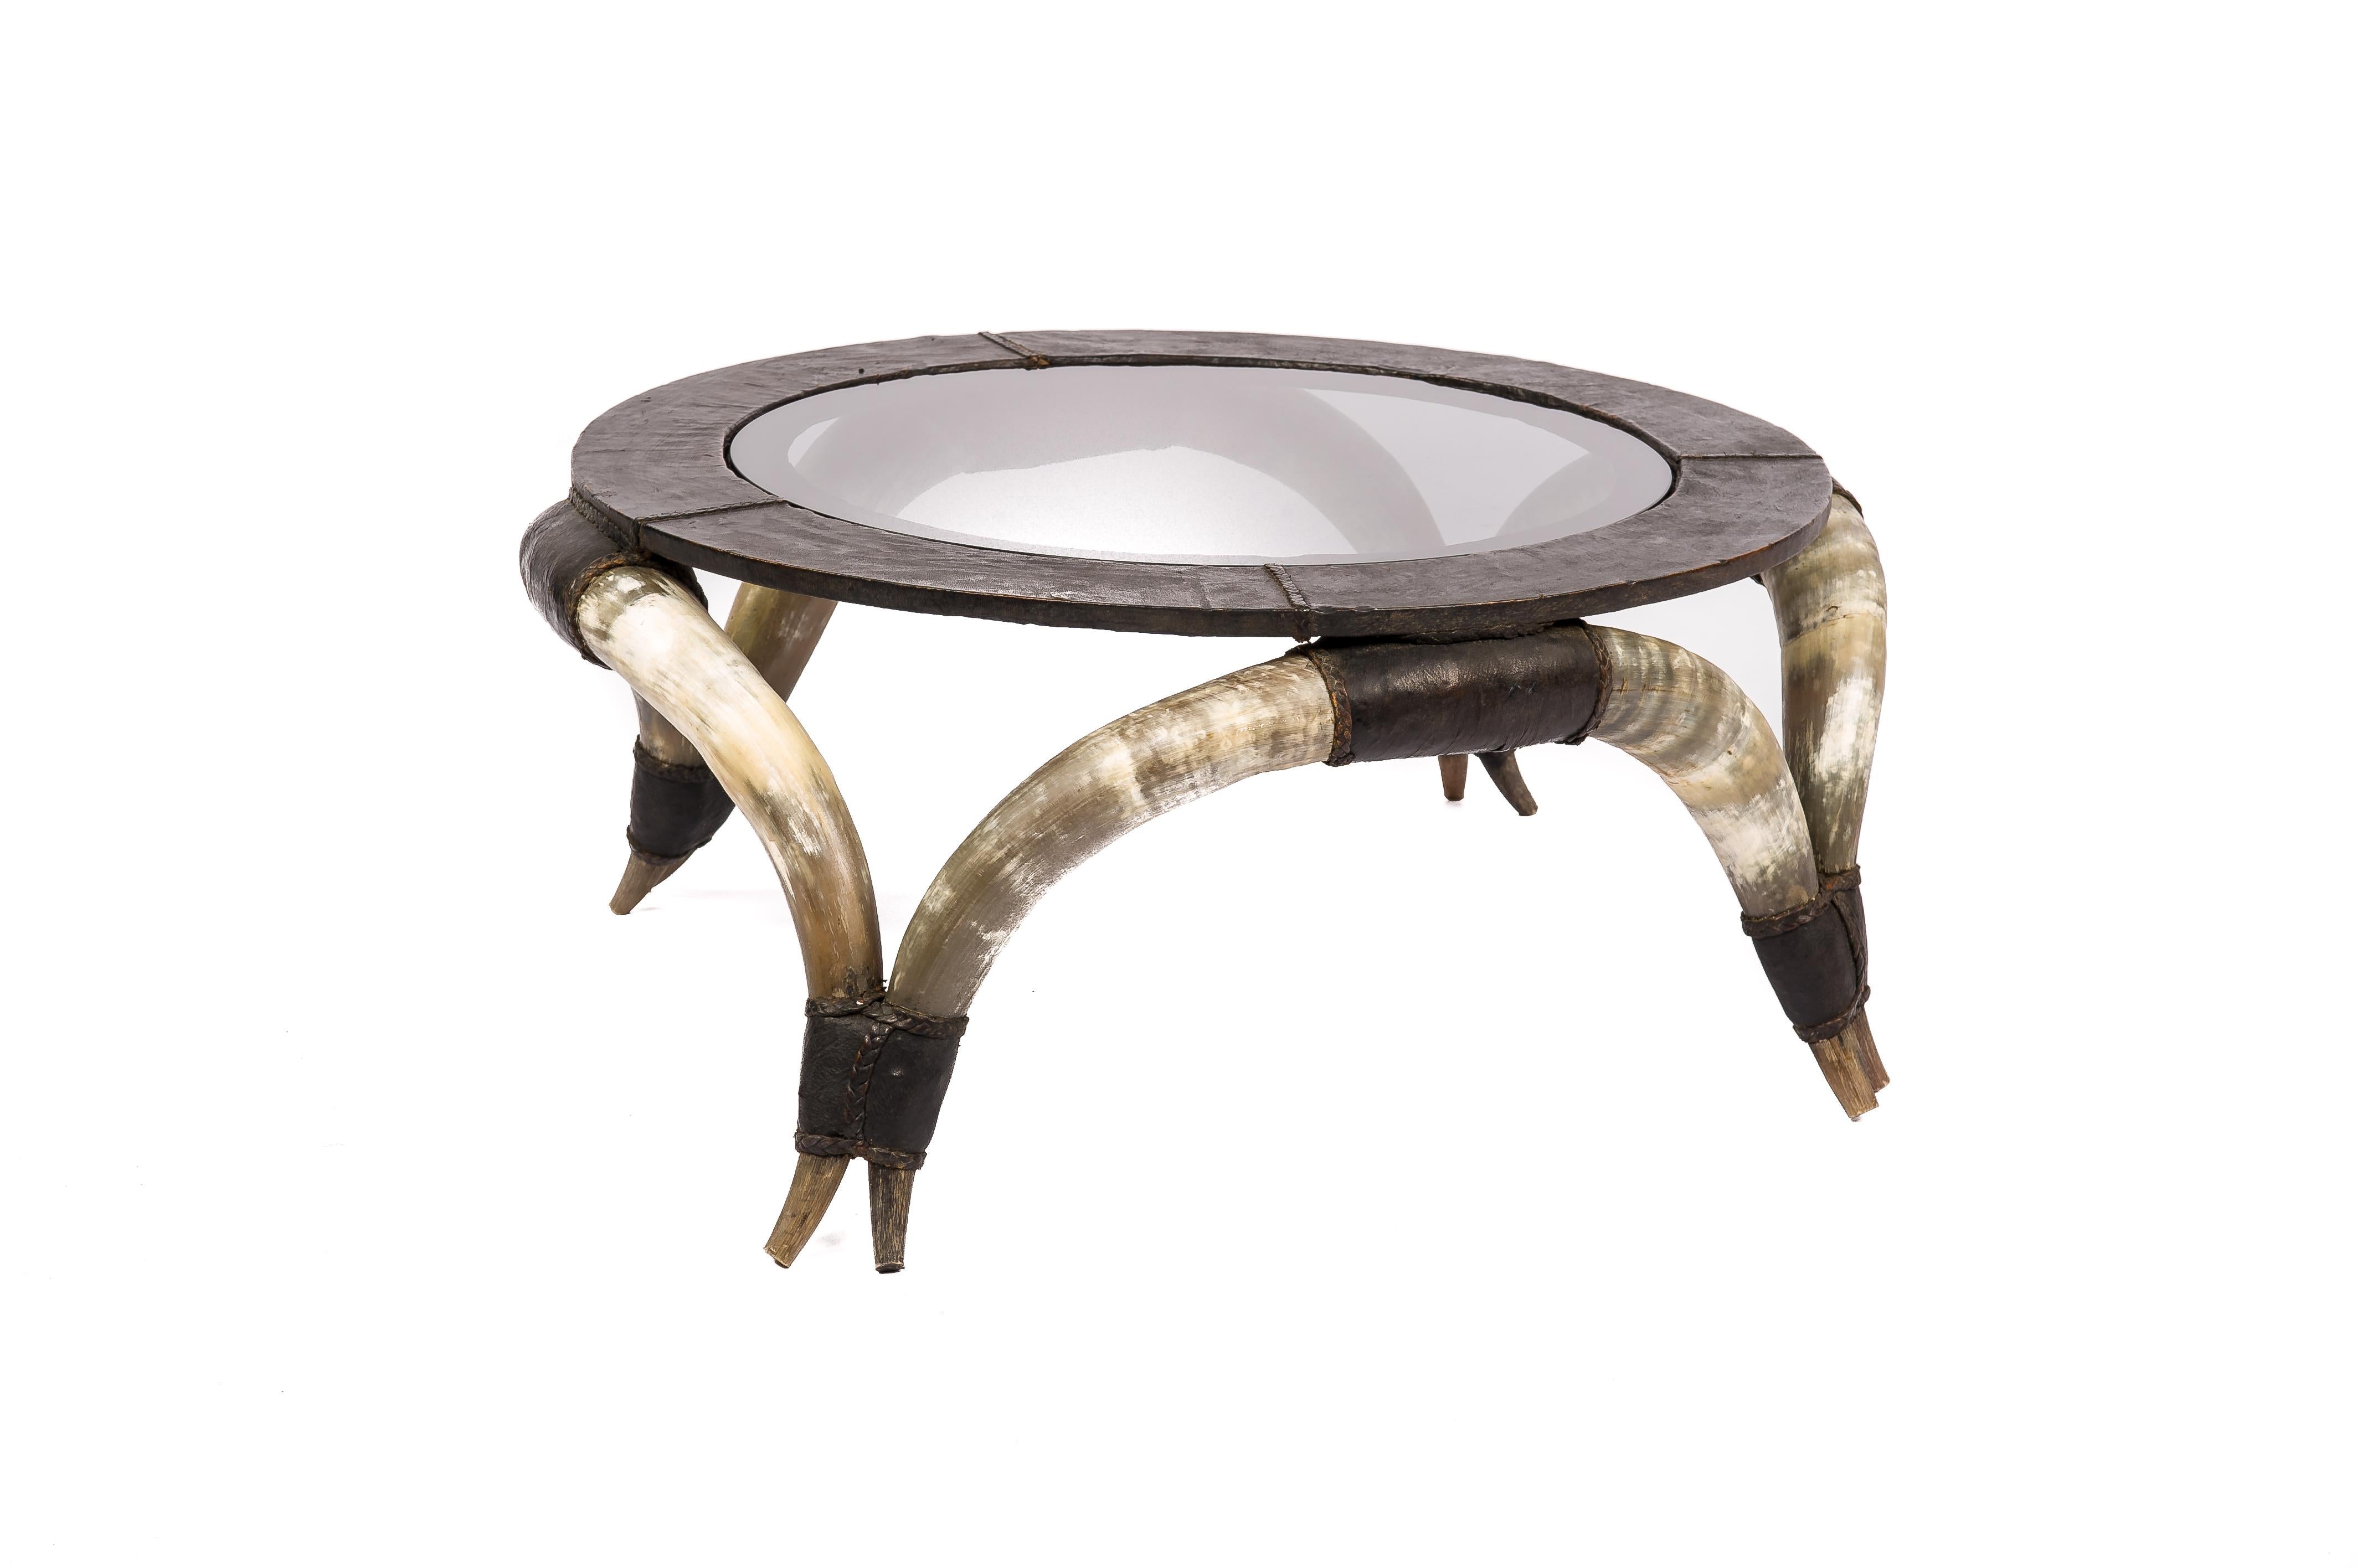 This exceptionally beautiful vintage coffee table had a circular top with an inlaid smoked glass panel. The wood is covered with matt black leather. The seems were covered with braided leather ribbons. The coffee table's top sits on 8 connected